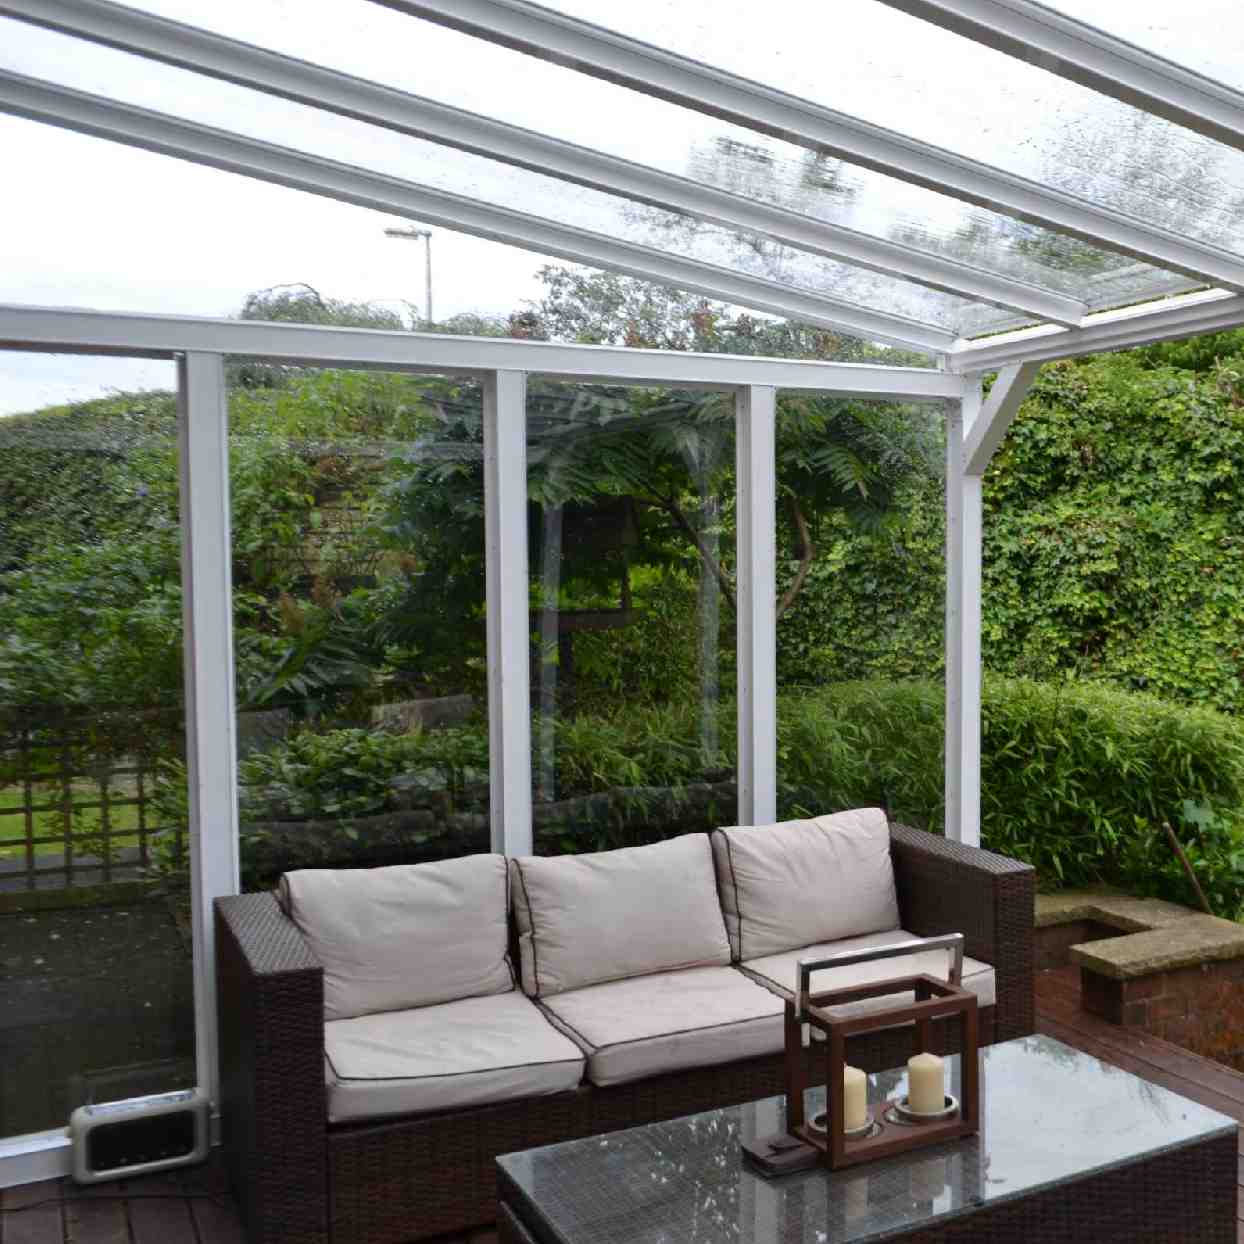 Buy Omega Verandah White with 16mm Polycarbonate Glazing - 11.6m (W) x 3.0m (P), (5) Supporting Posts online today